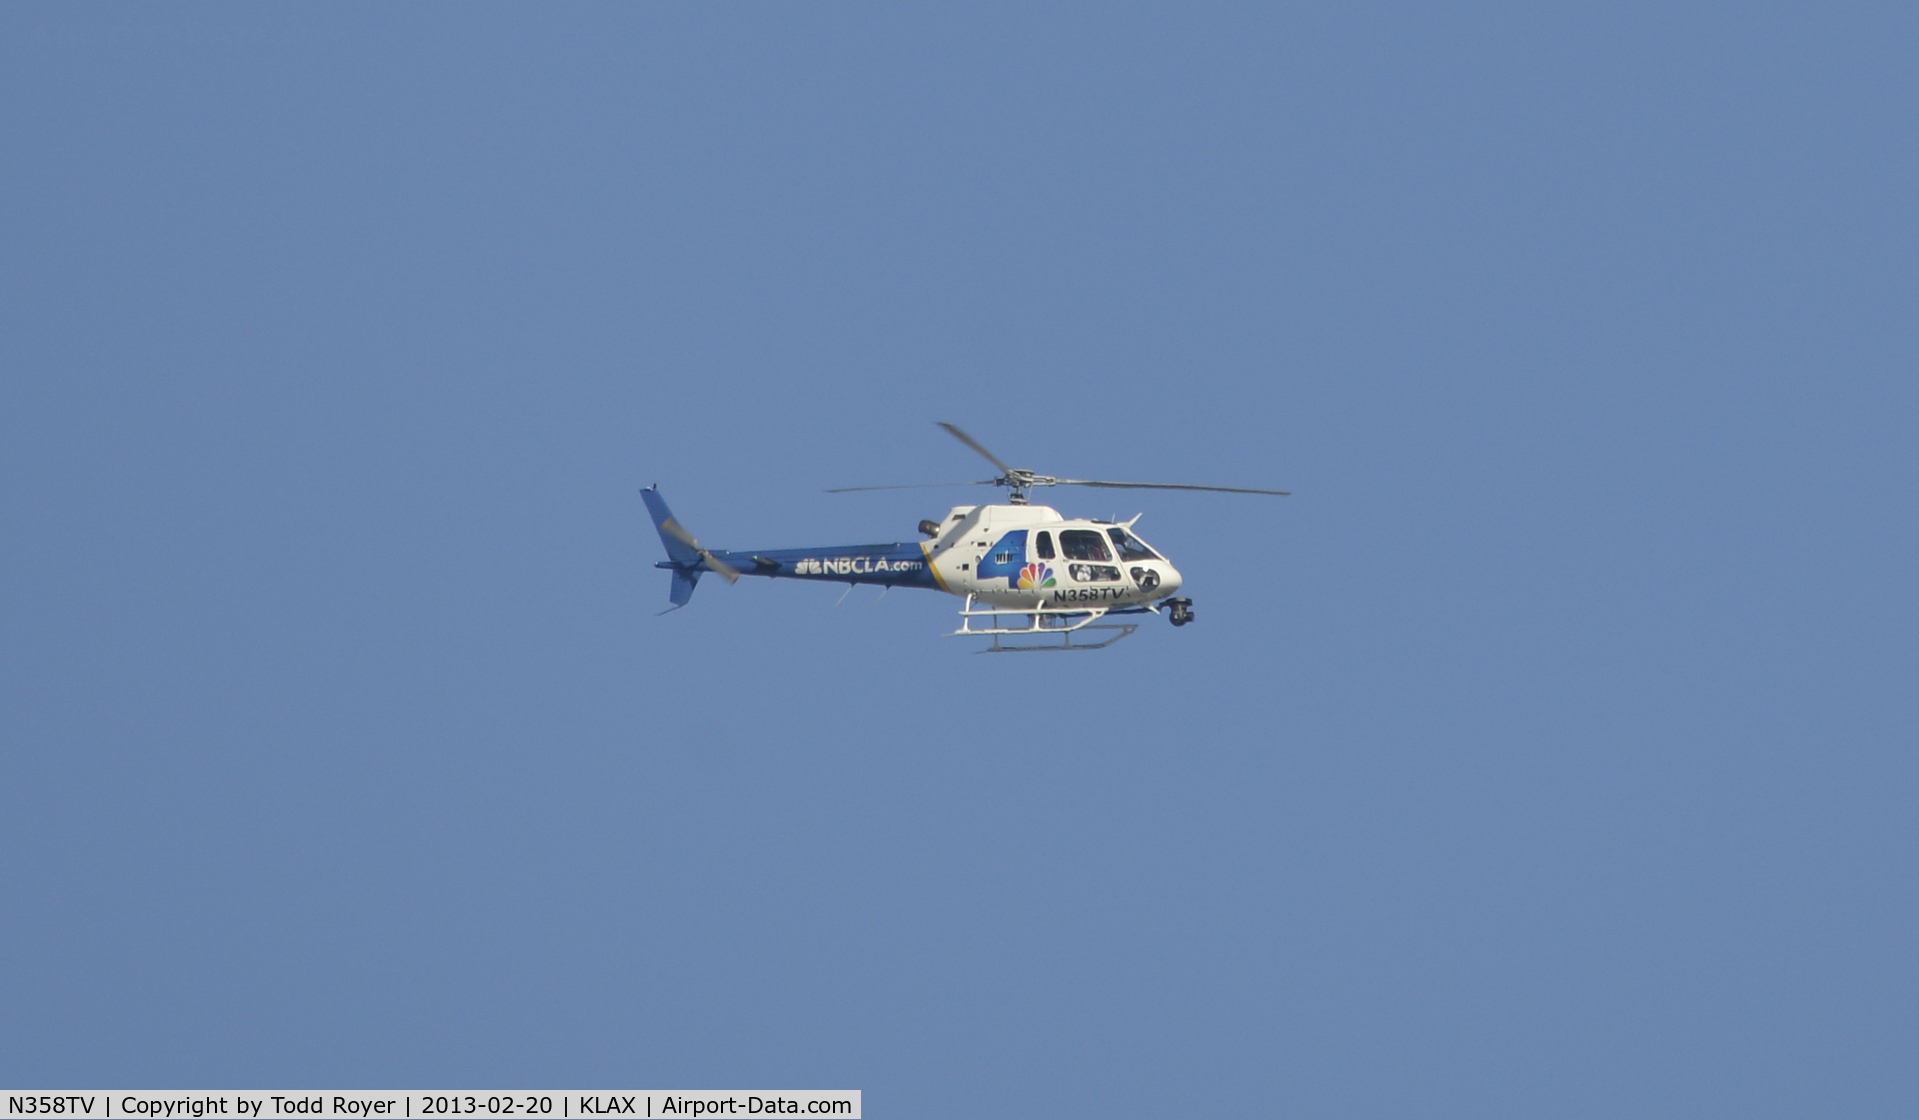 N358TV, 2004 Eurocopter AS-350B-2 Ecureuil Ecureuil C/N 3788, Passing over LAX